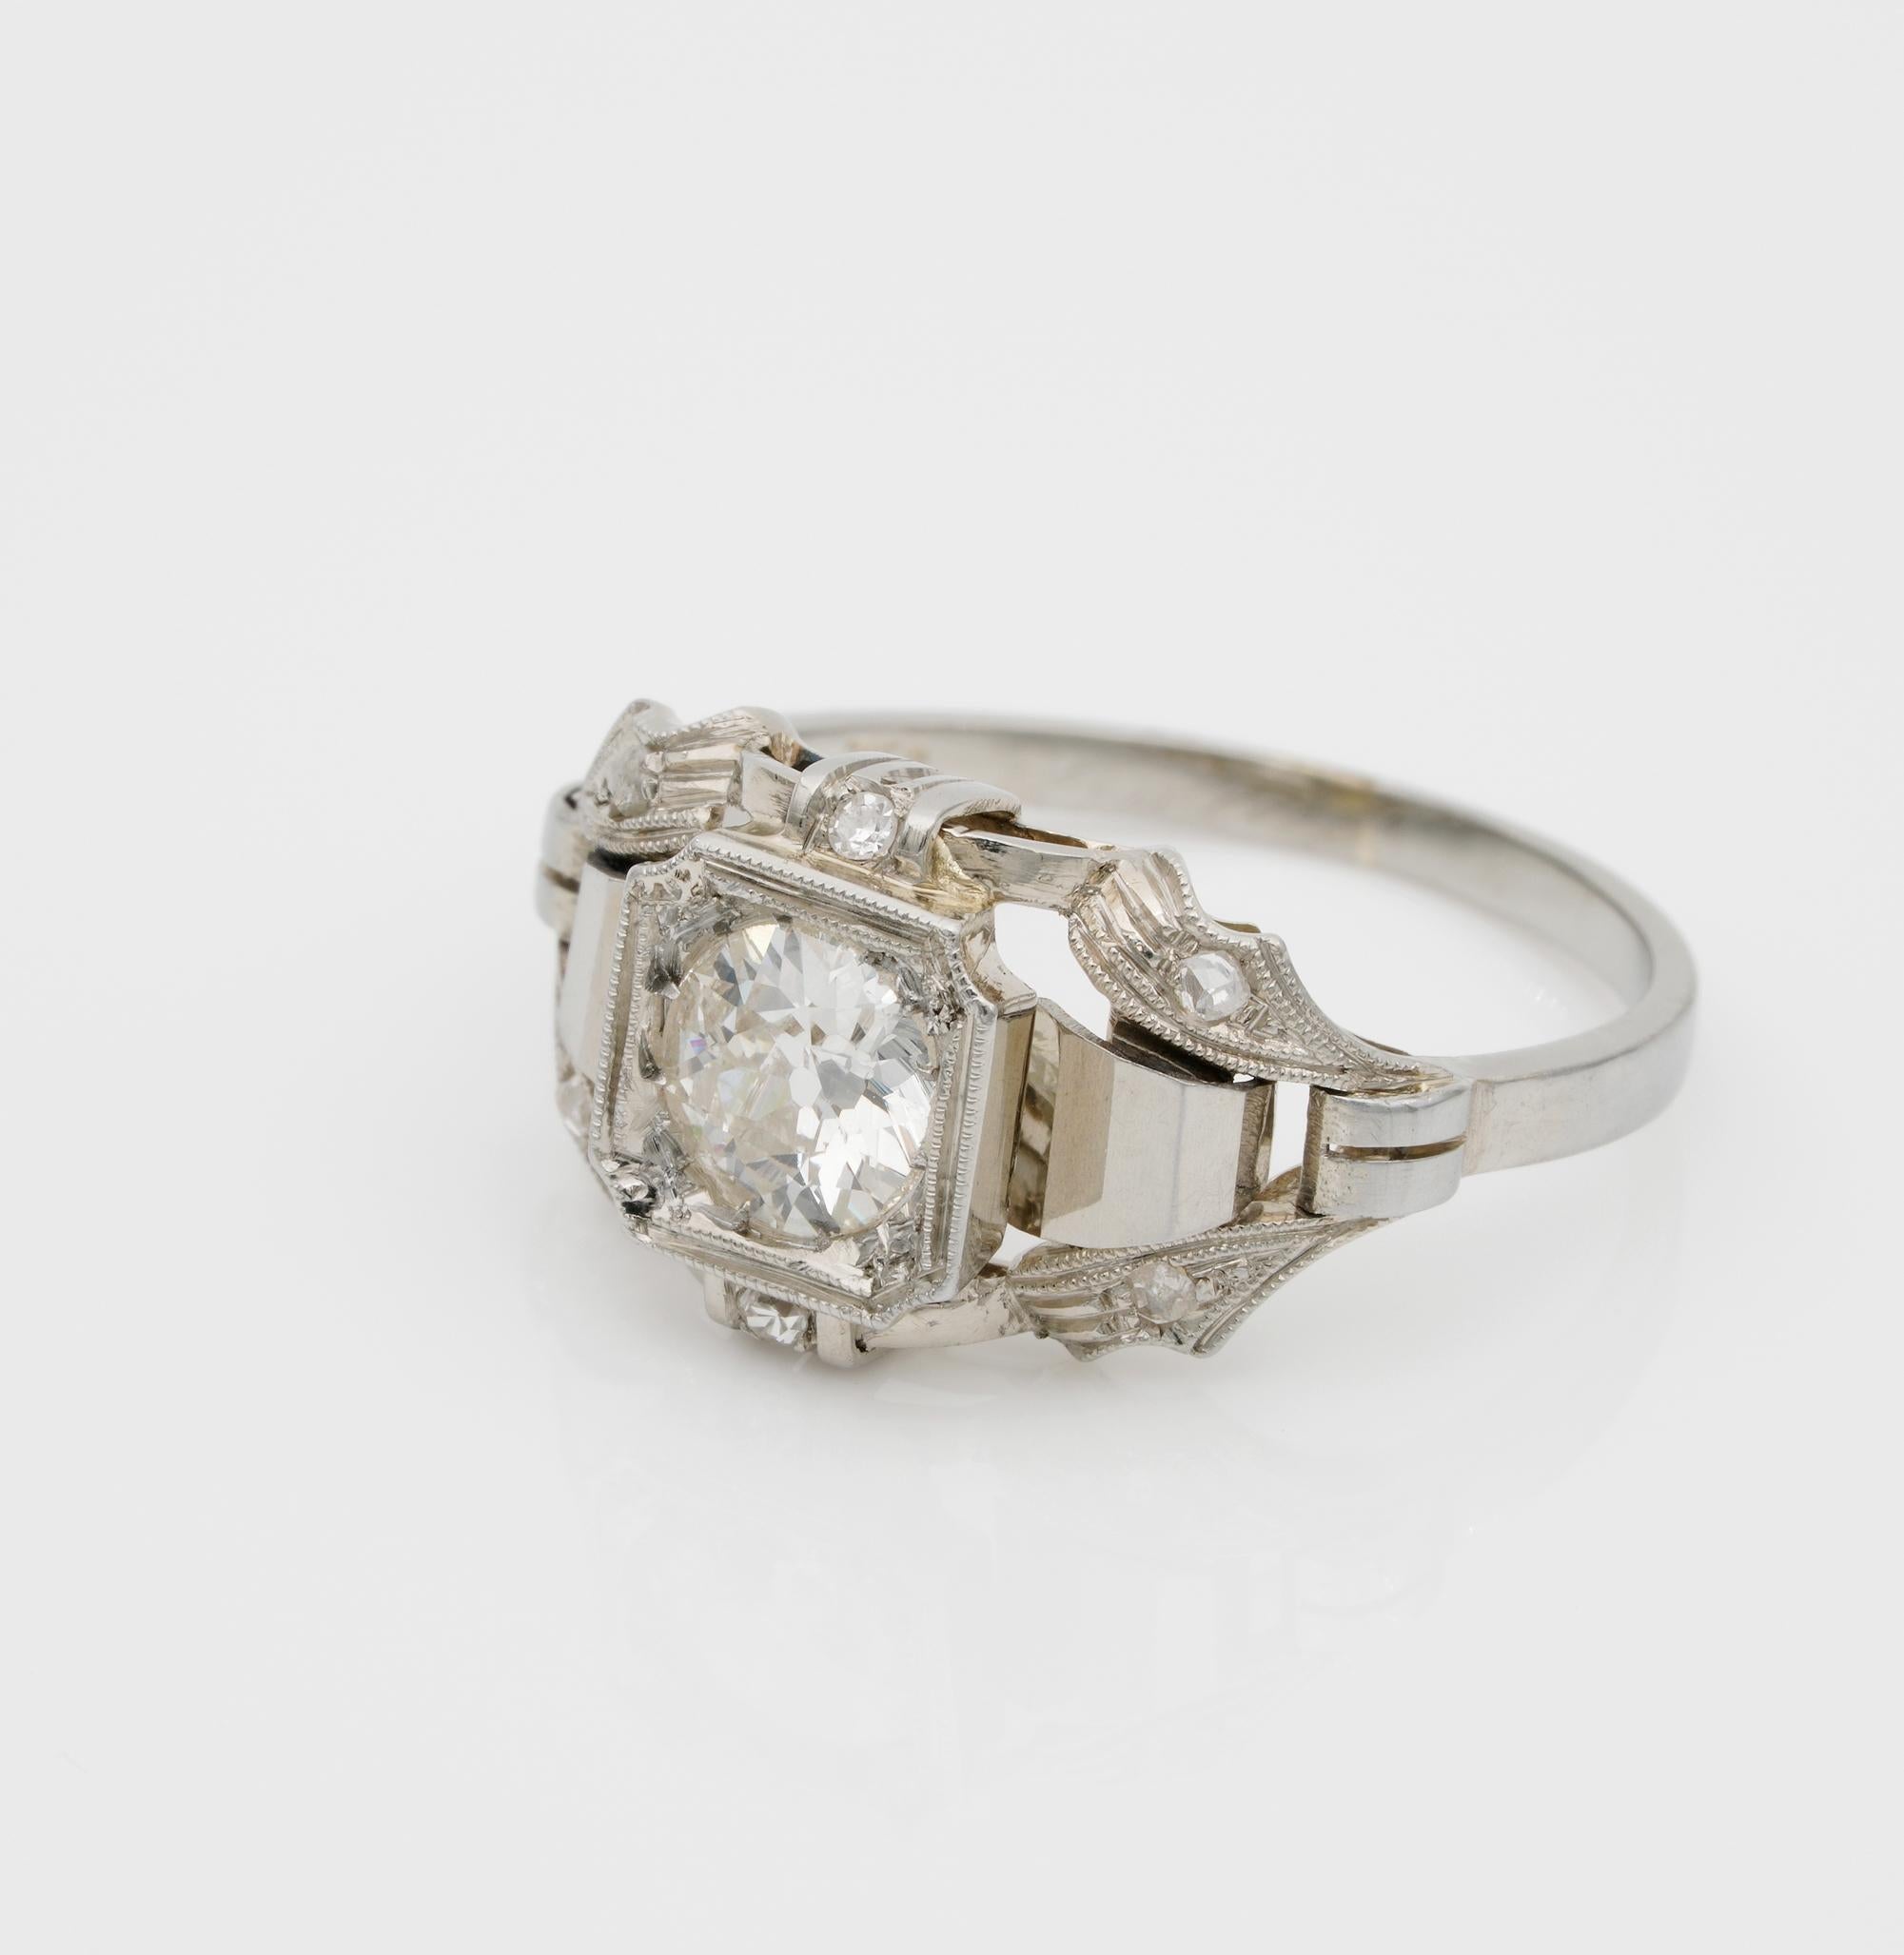 Stunning Art Deco .65 Carat Solitaire Diamond Ring For Sale 1